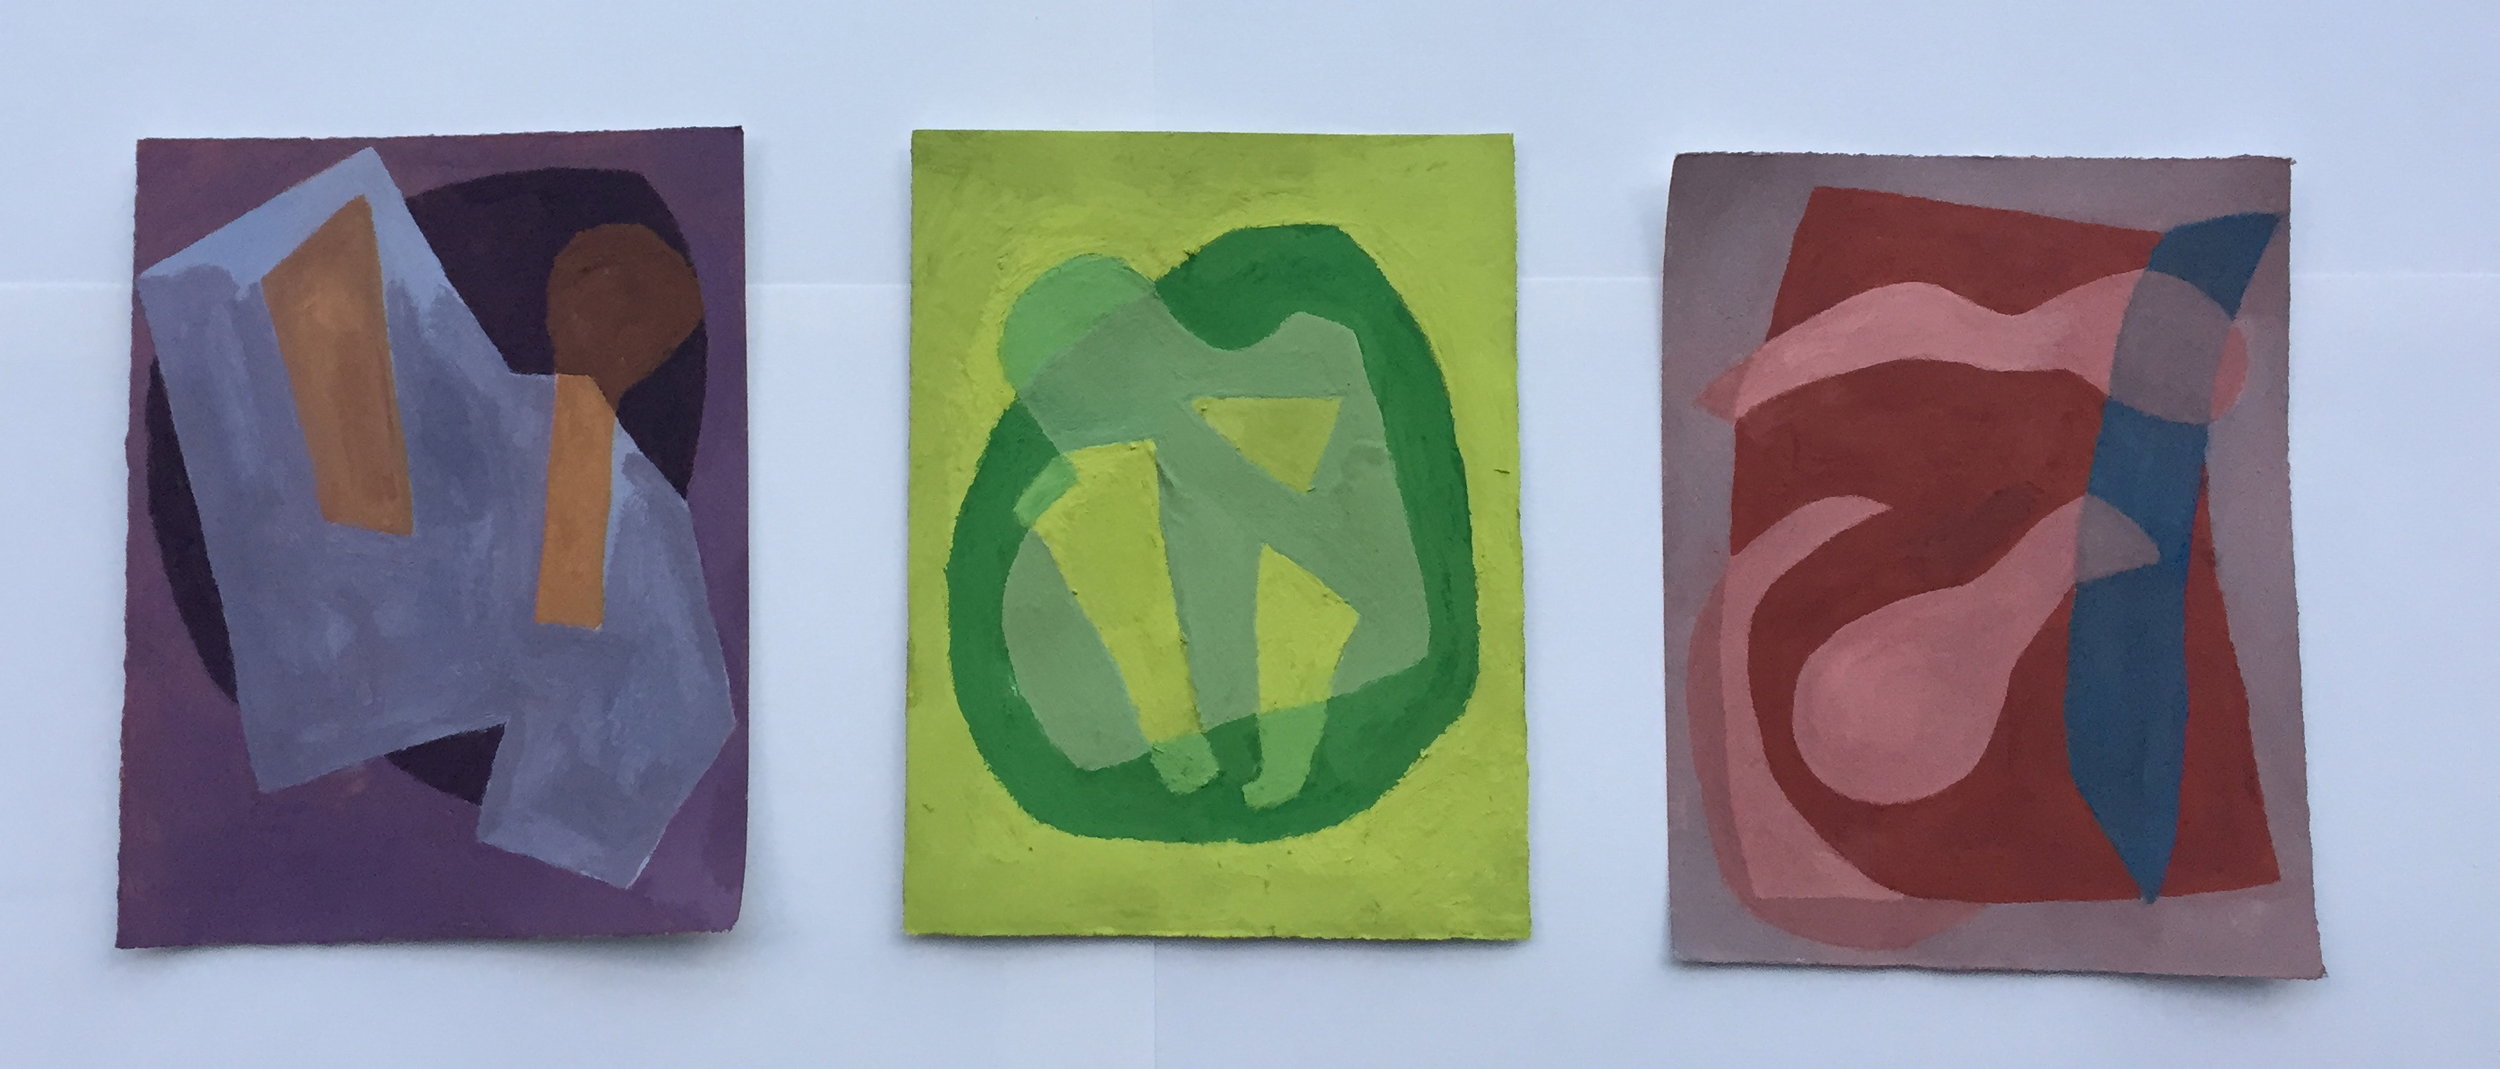 Abstract Forms, 2015, gouache and paper